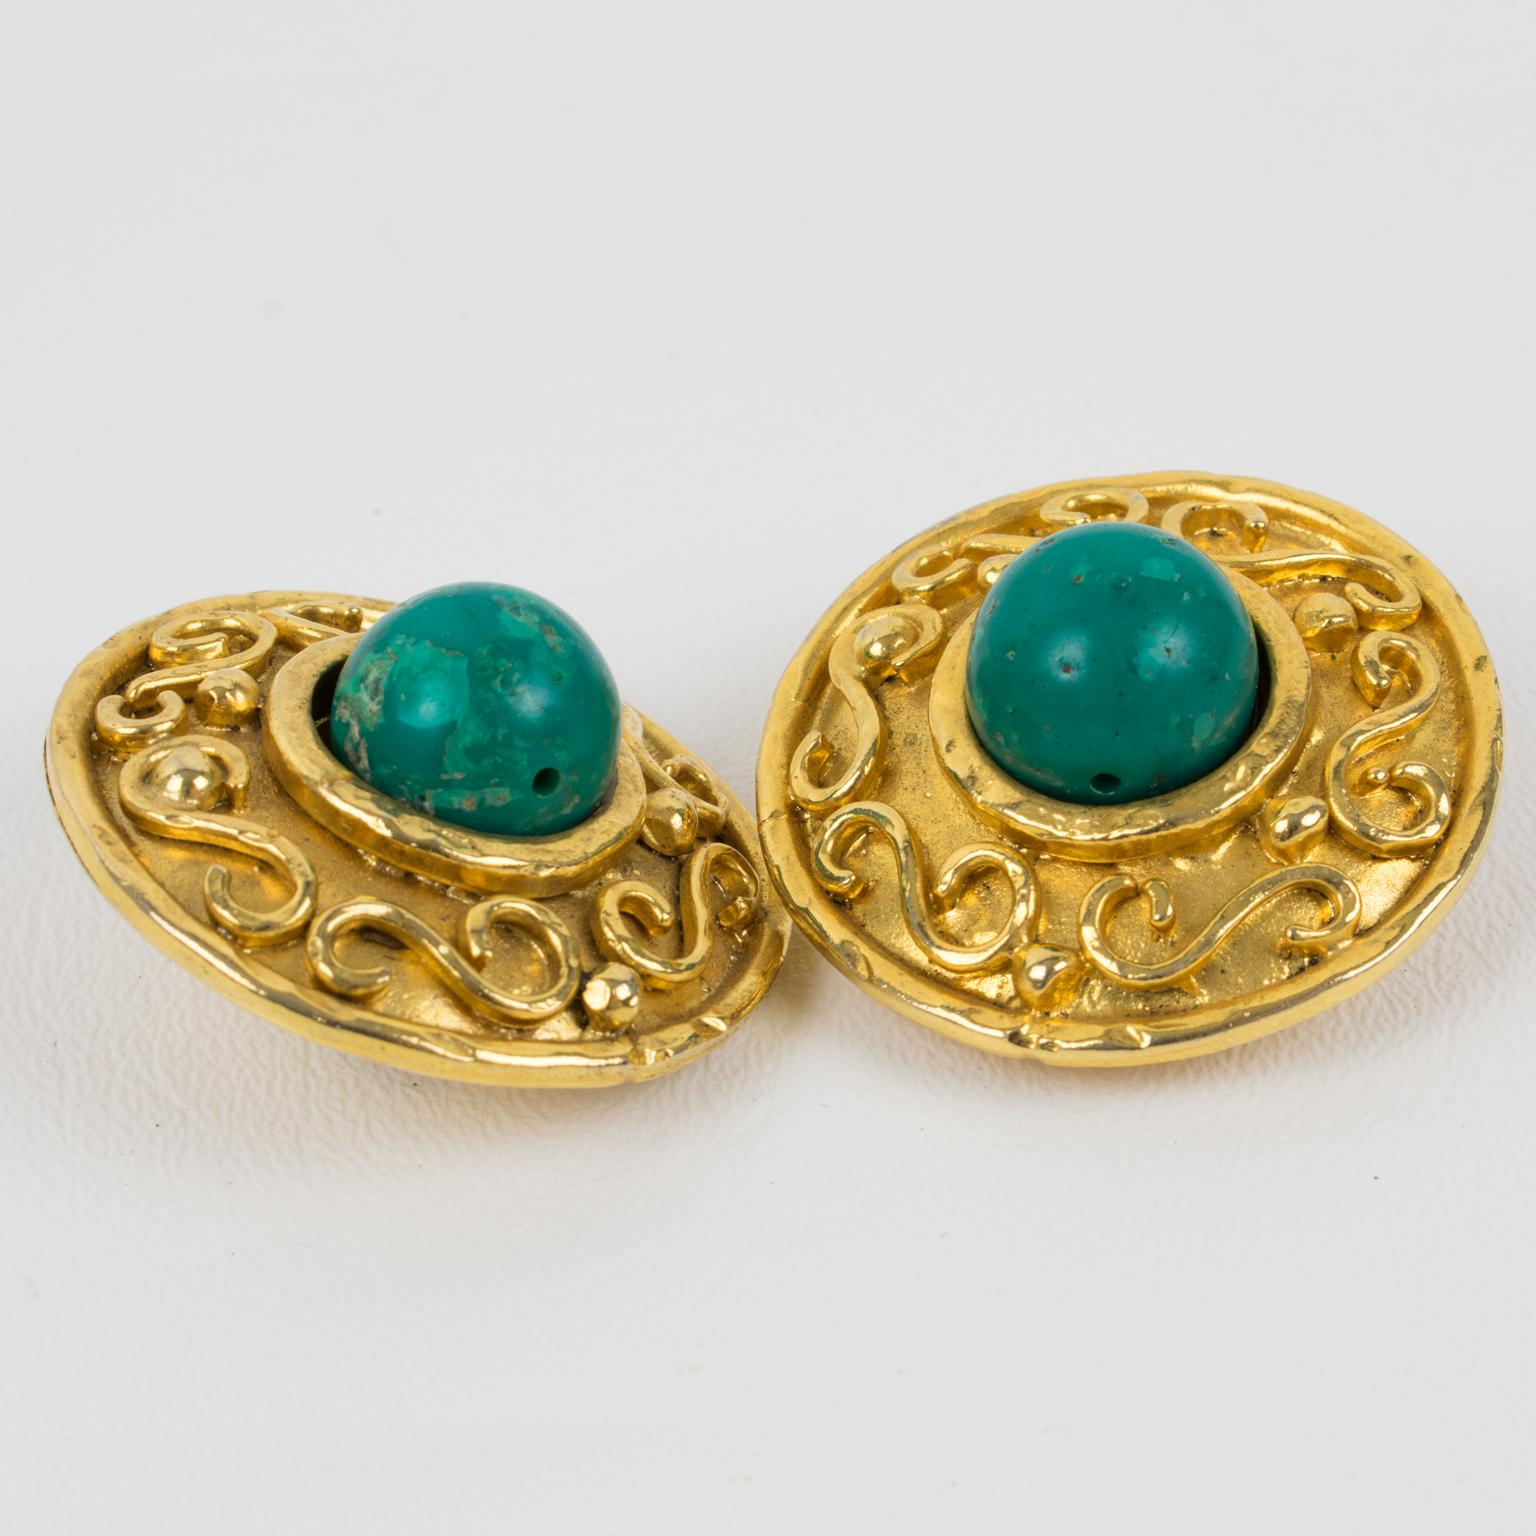 Edouard Rambaud Paris Clip Earrings with Turquoise Resin Cabochon For Sale 2